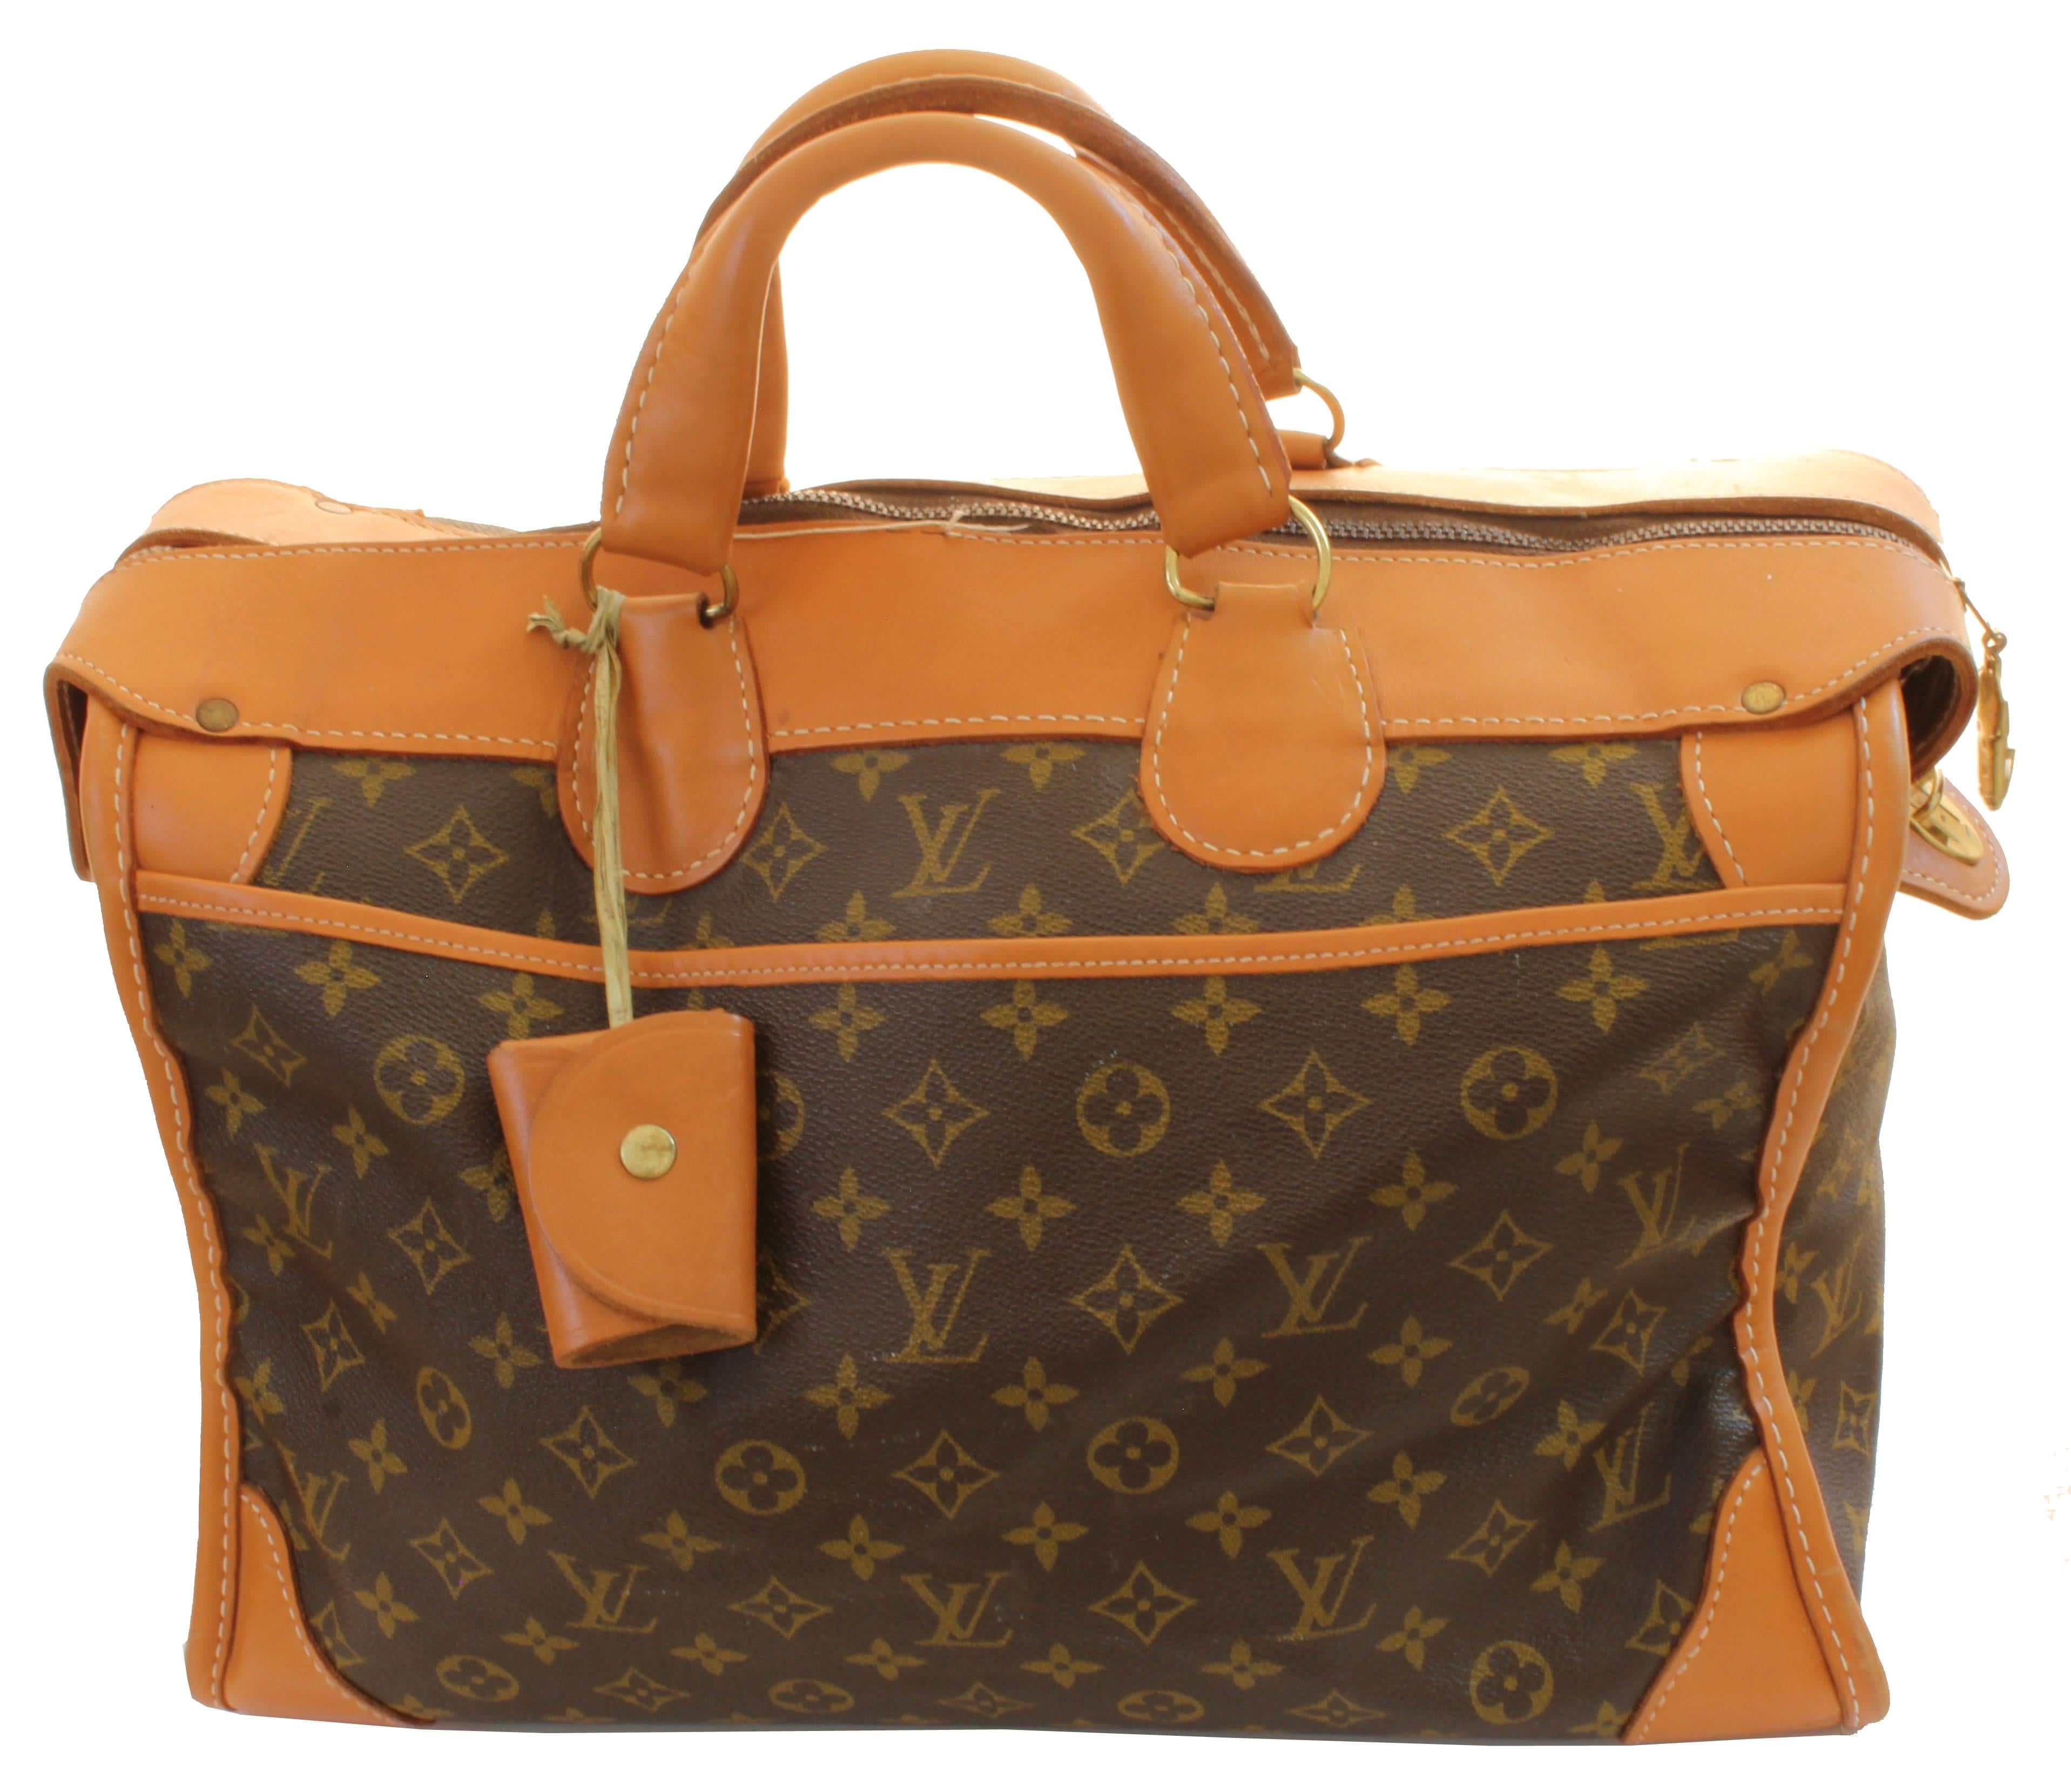 Travel in style with this Louis Vuitton monogram carry on or keepall bag, made by The French Company under special license for Louis Vuitton, long before LV established their own manufacturing in the USA.  Made from monogram canvas and trimmed in